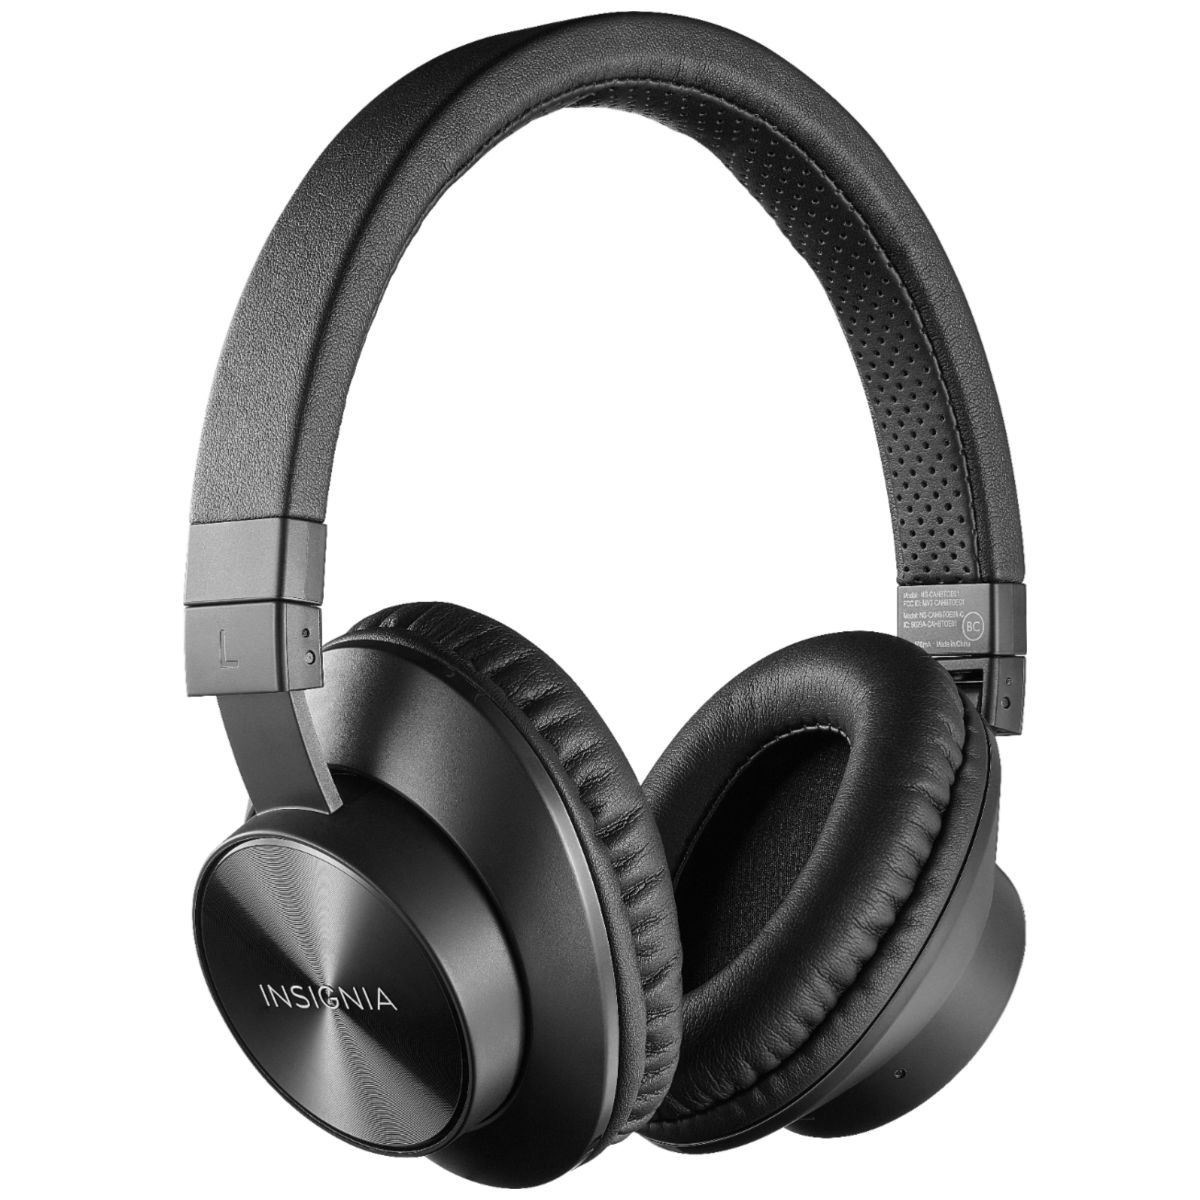 Insignia Wireless Over-the-Ear Headphones NS-CAHBTOE01